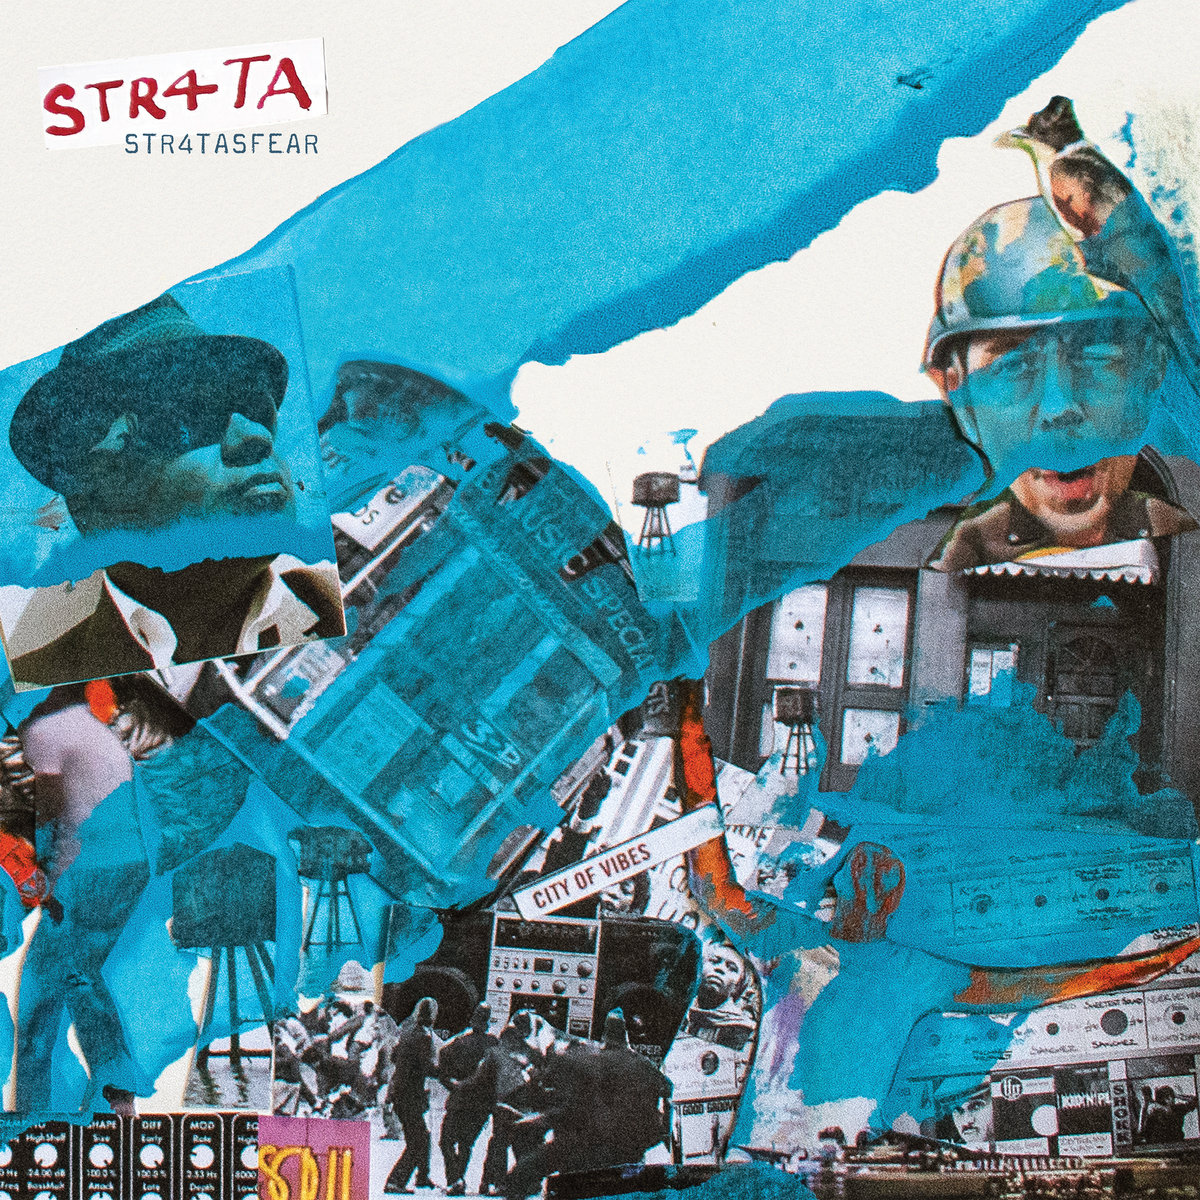 We are excited to announce STR4TA’s sophomore album ‘STR4TASFEAR